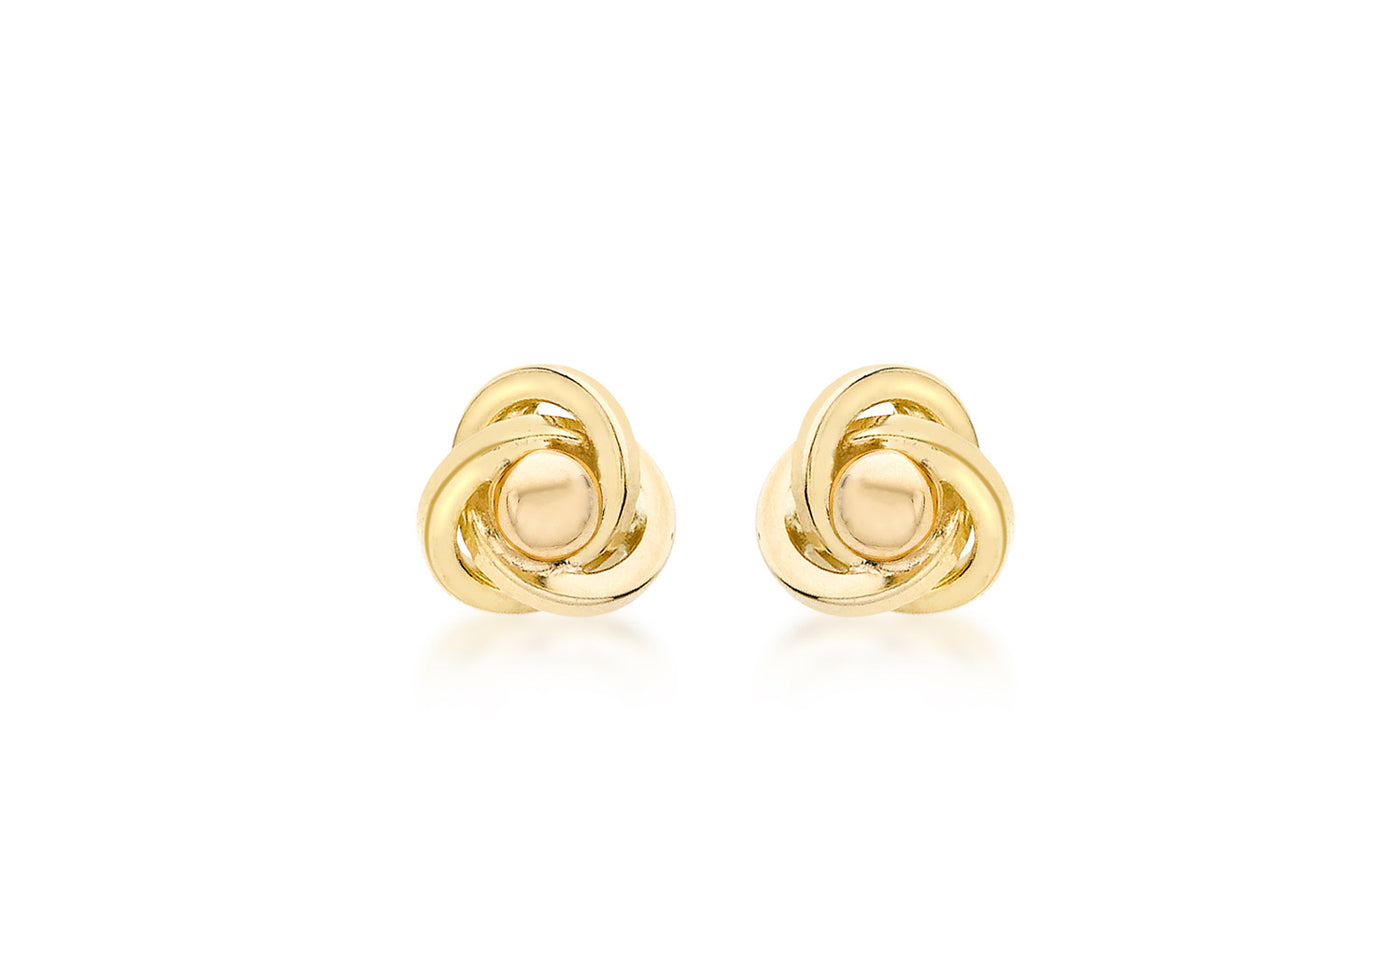 9ct yellow Gold Knot Stud Earrings